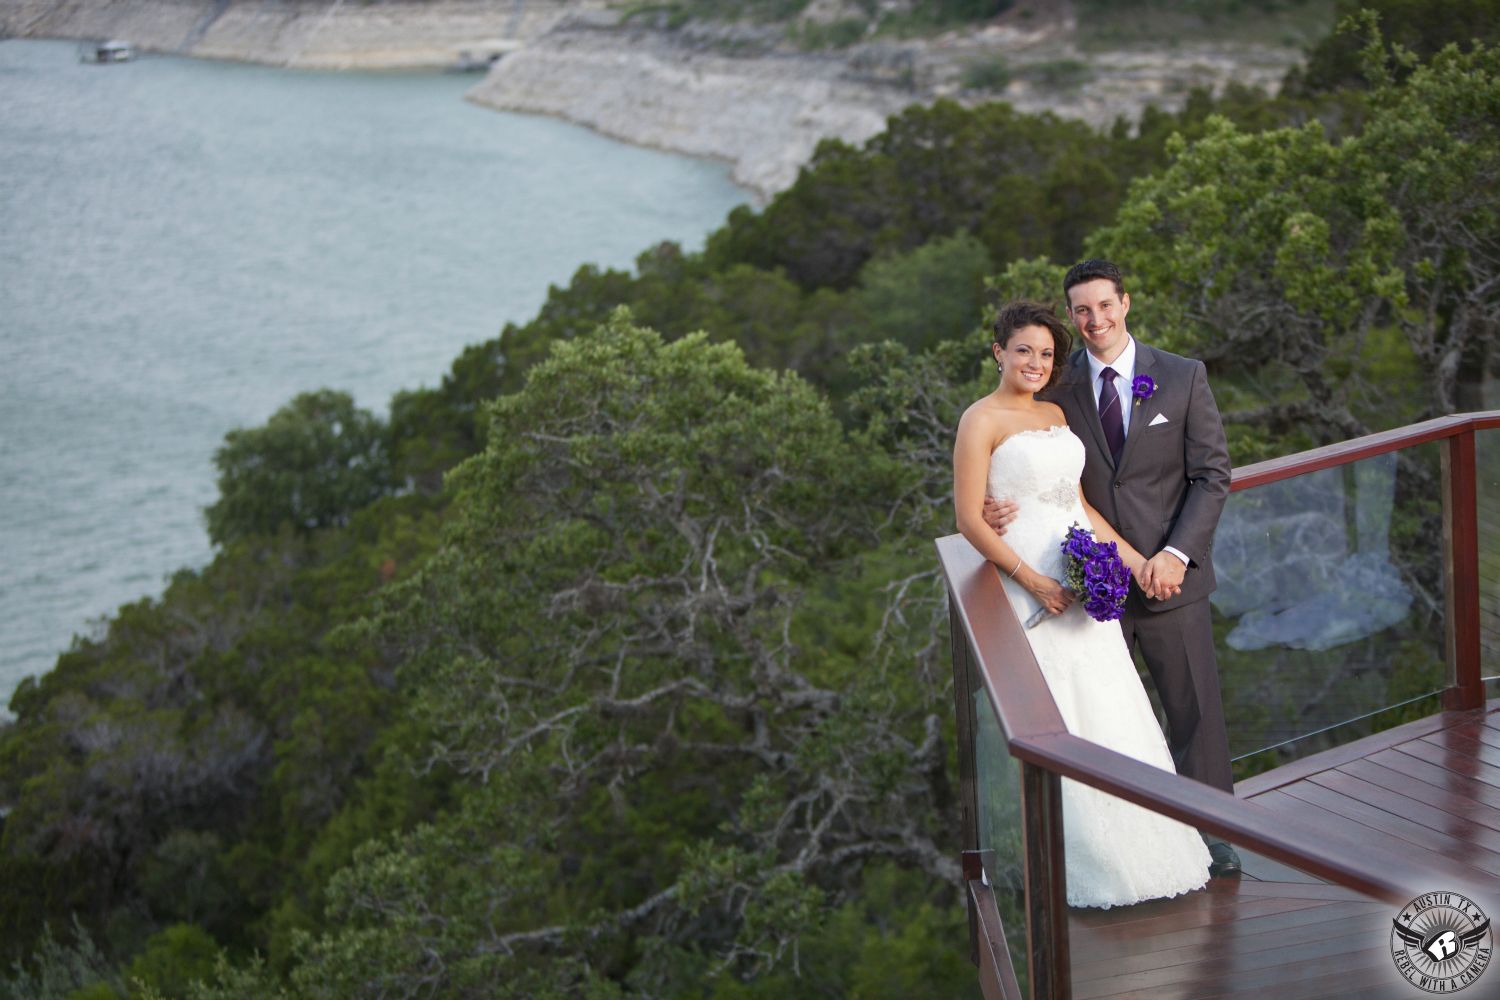 Bride in Priscilla of Boston strapless white lace wedding gown with sparkly sash and carrying bridal bouquet of purple anemone flowers by Visual Lyrics Floral Artistry and groom in grey suit and and eggplant colored tie with violet  anemone boutonniere on deck overlooking Lake Travis at Nature's Point Austin wedding venue.